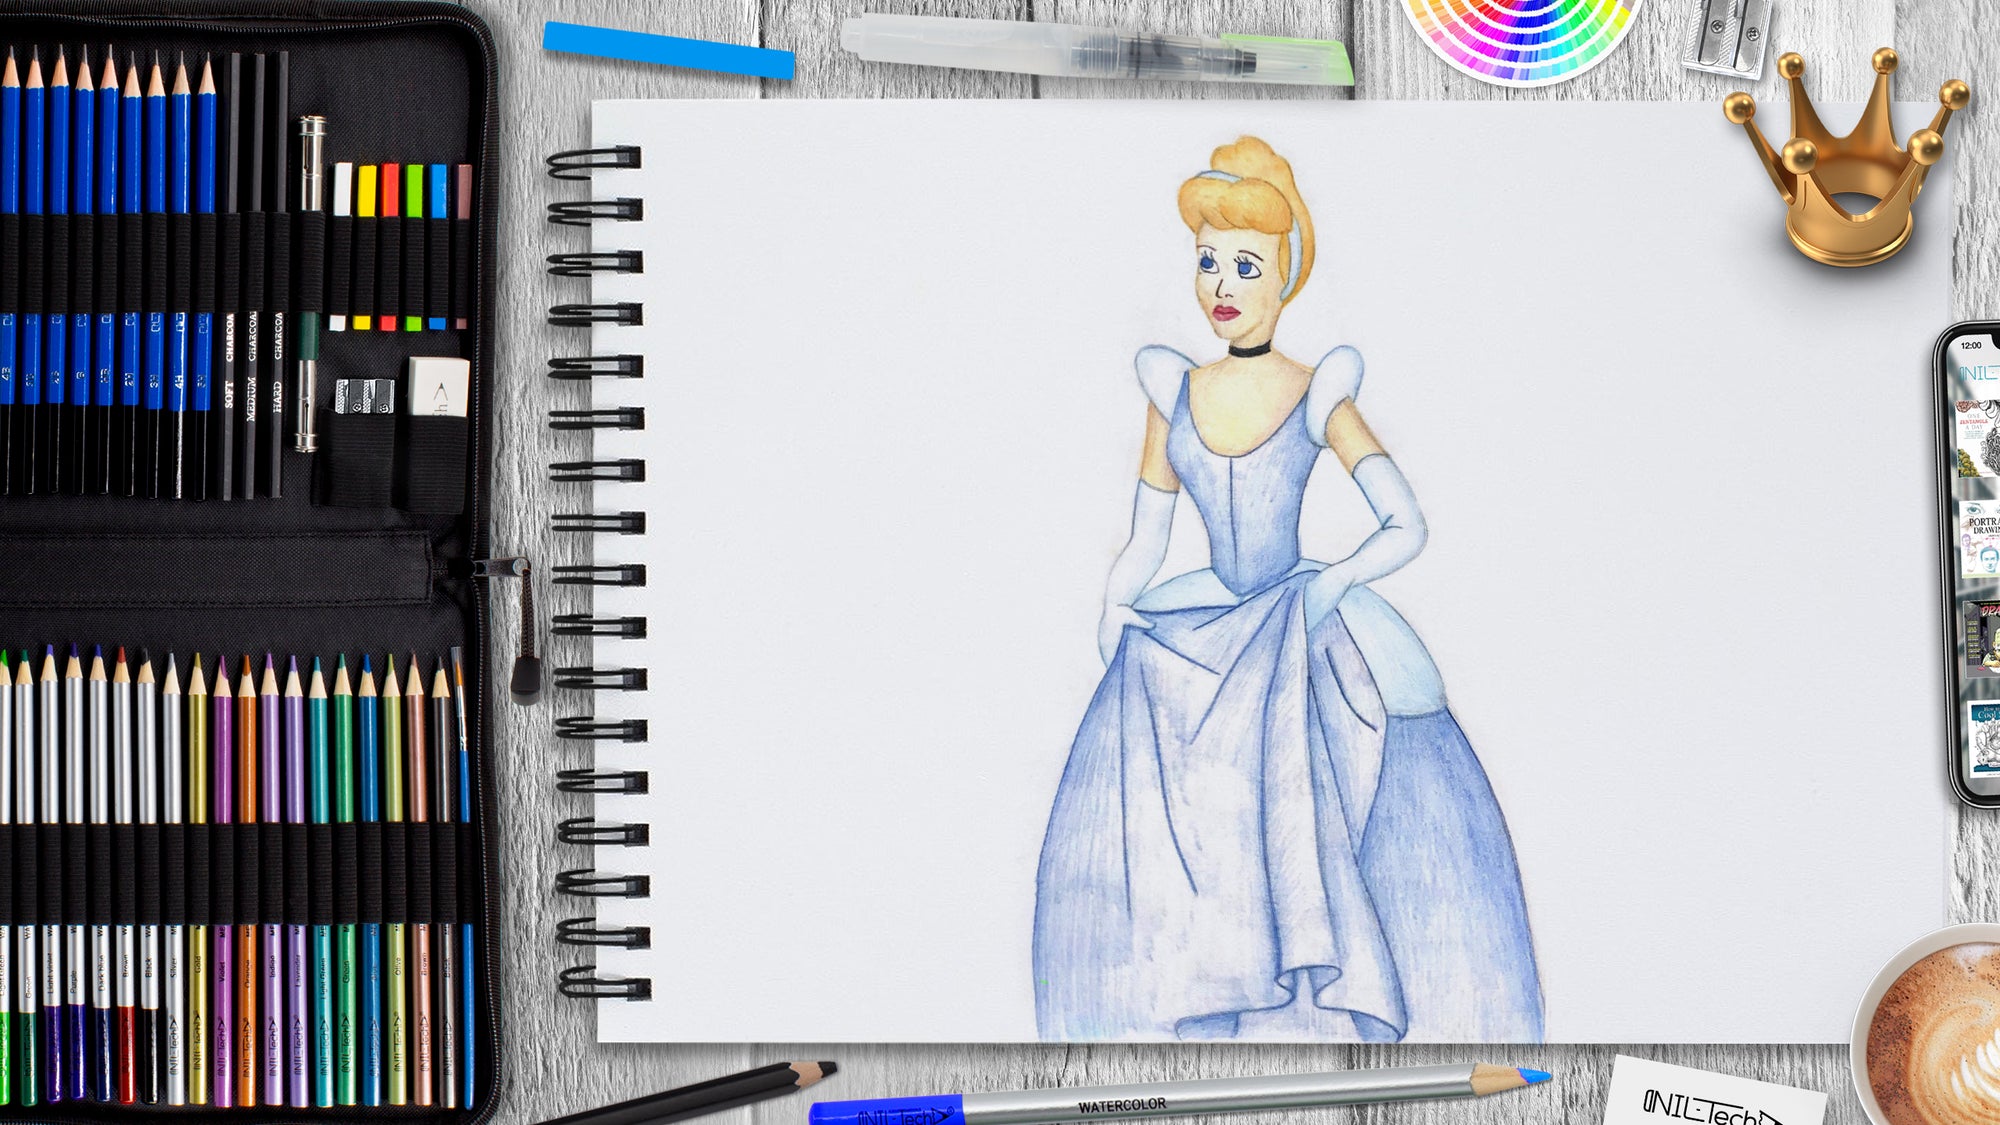 How to Draw Cinderella Step 2 | Cinderella drawing, Princess drawings,  Dress drawing easy